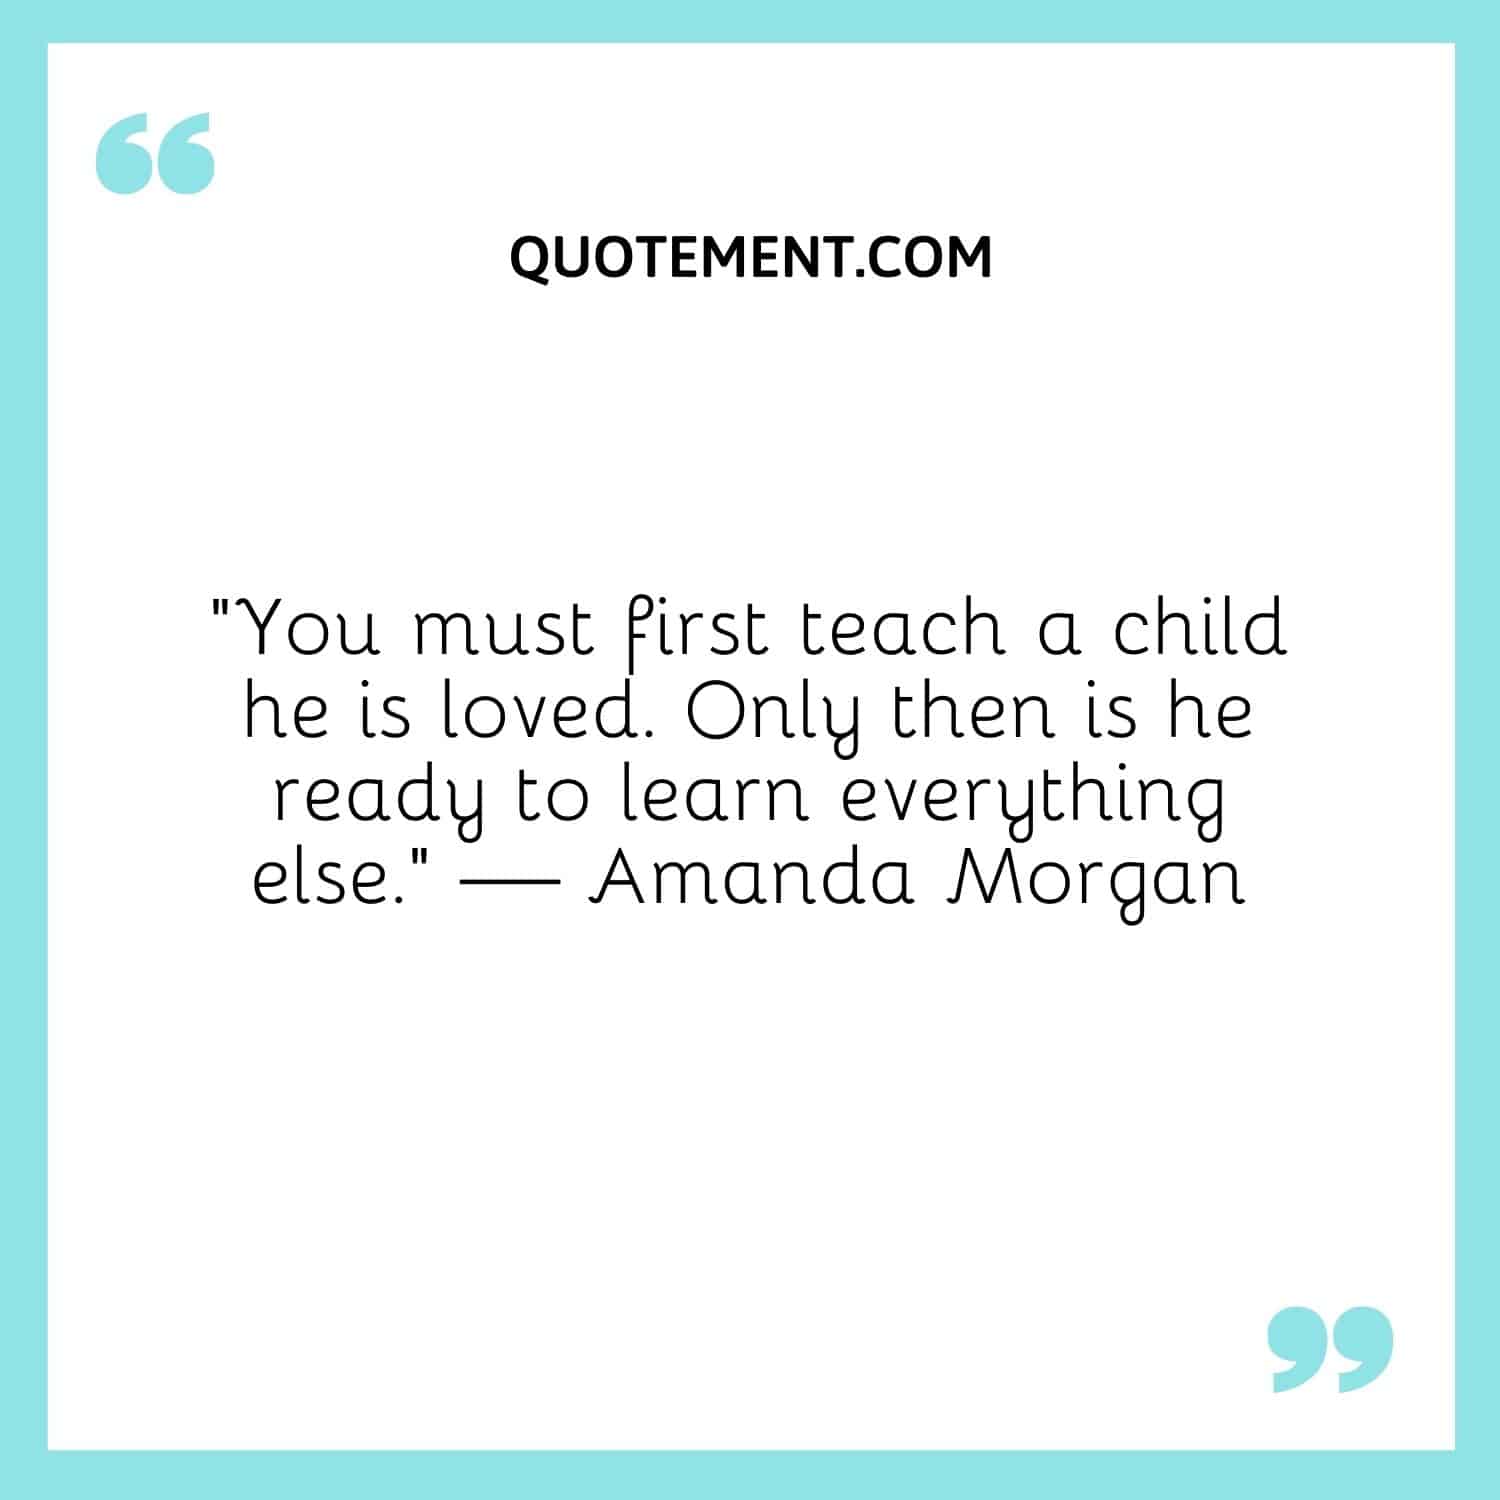 “You must first teach a child he is loved. Only then is he ready to learn everything else.” — Amanda Morgan